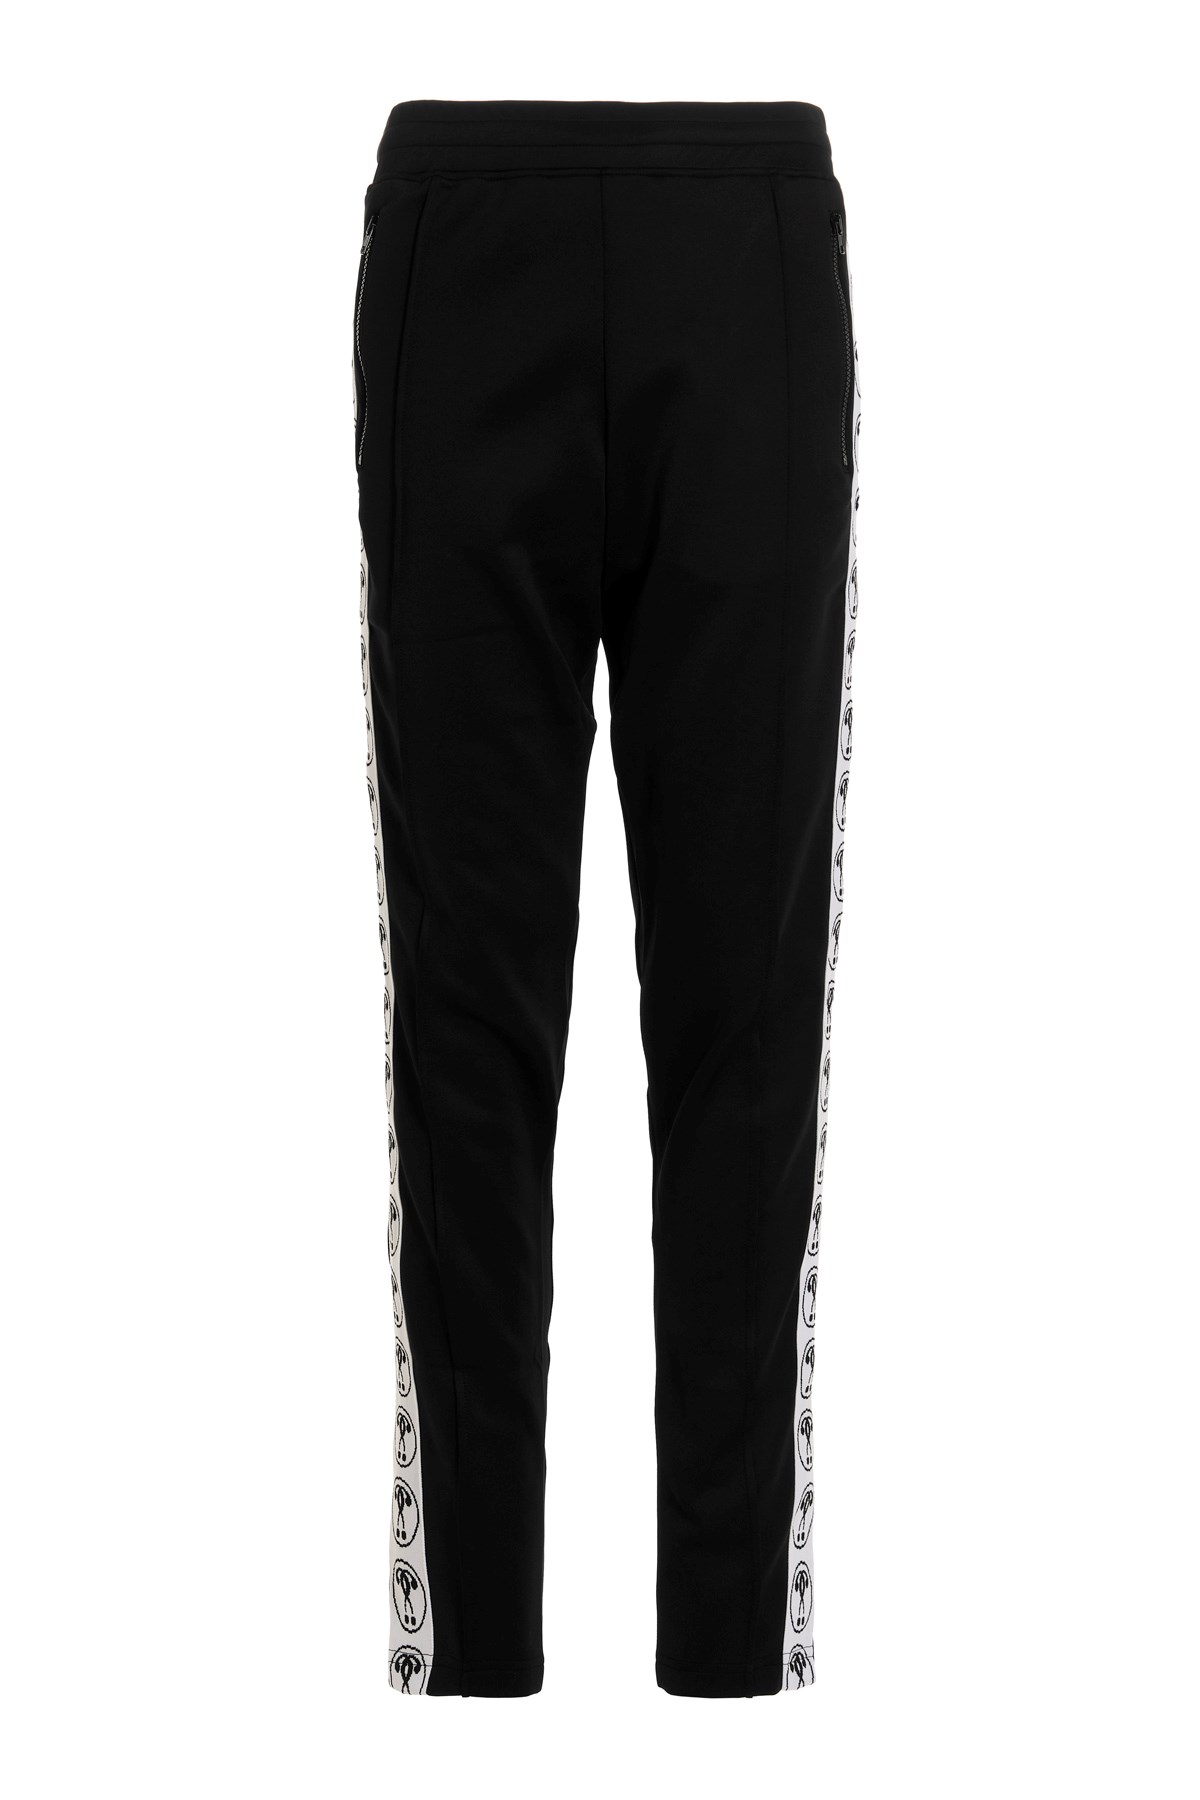 MOSCHINO Question Mark Logo Band Joggers